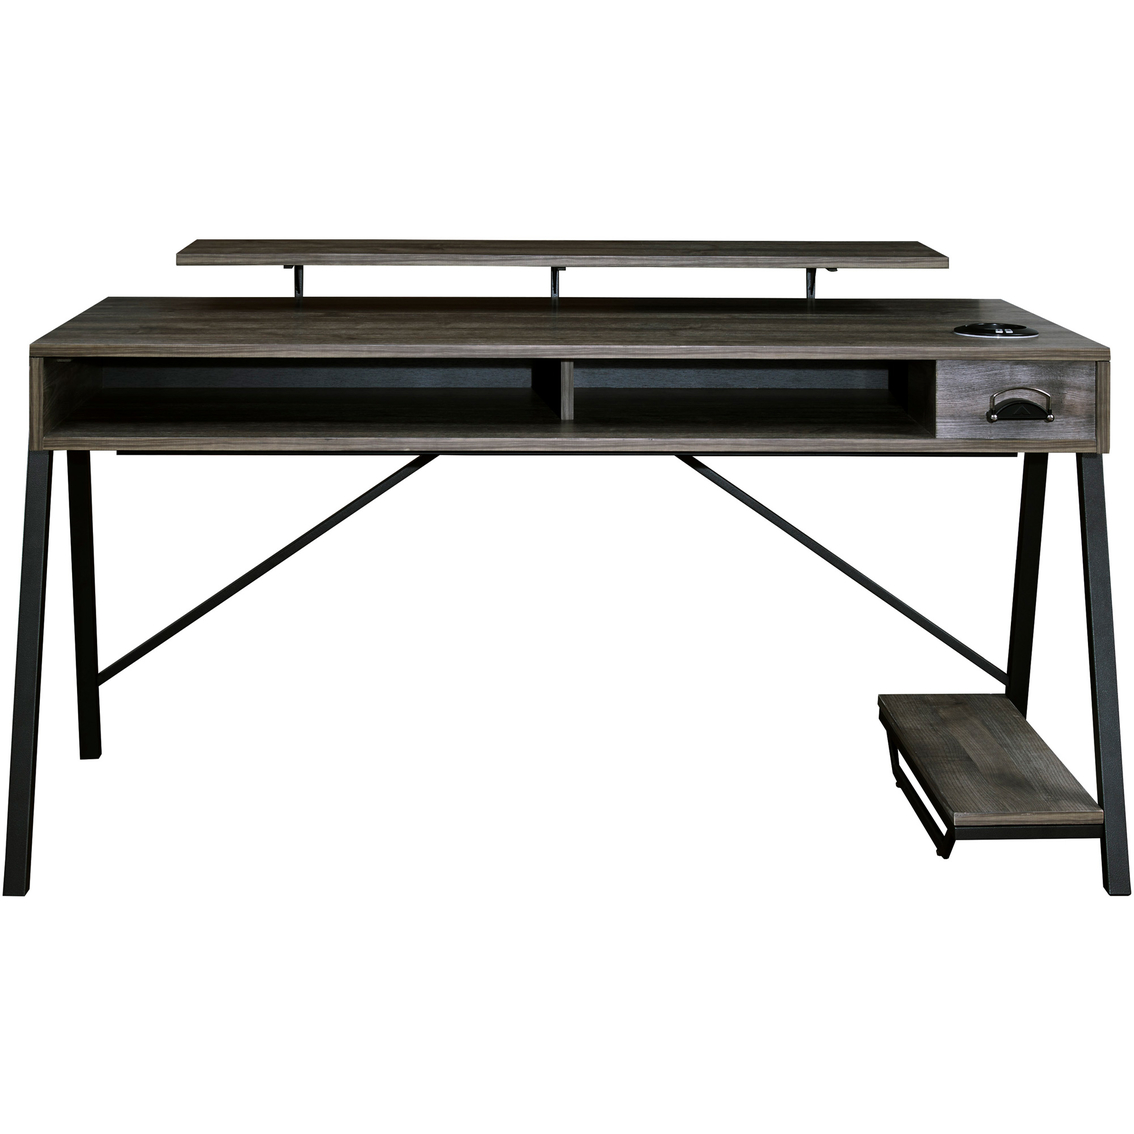 Signature Design by Ashley Barolli Gaming Desk with Monitor Stand - Image 2 of 8